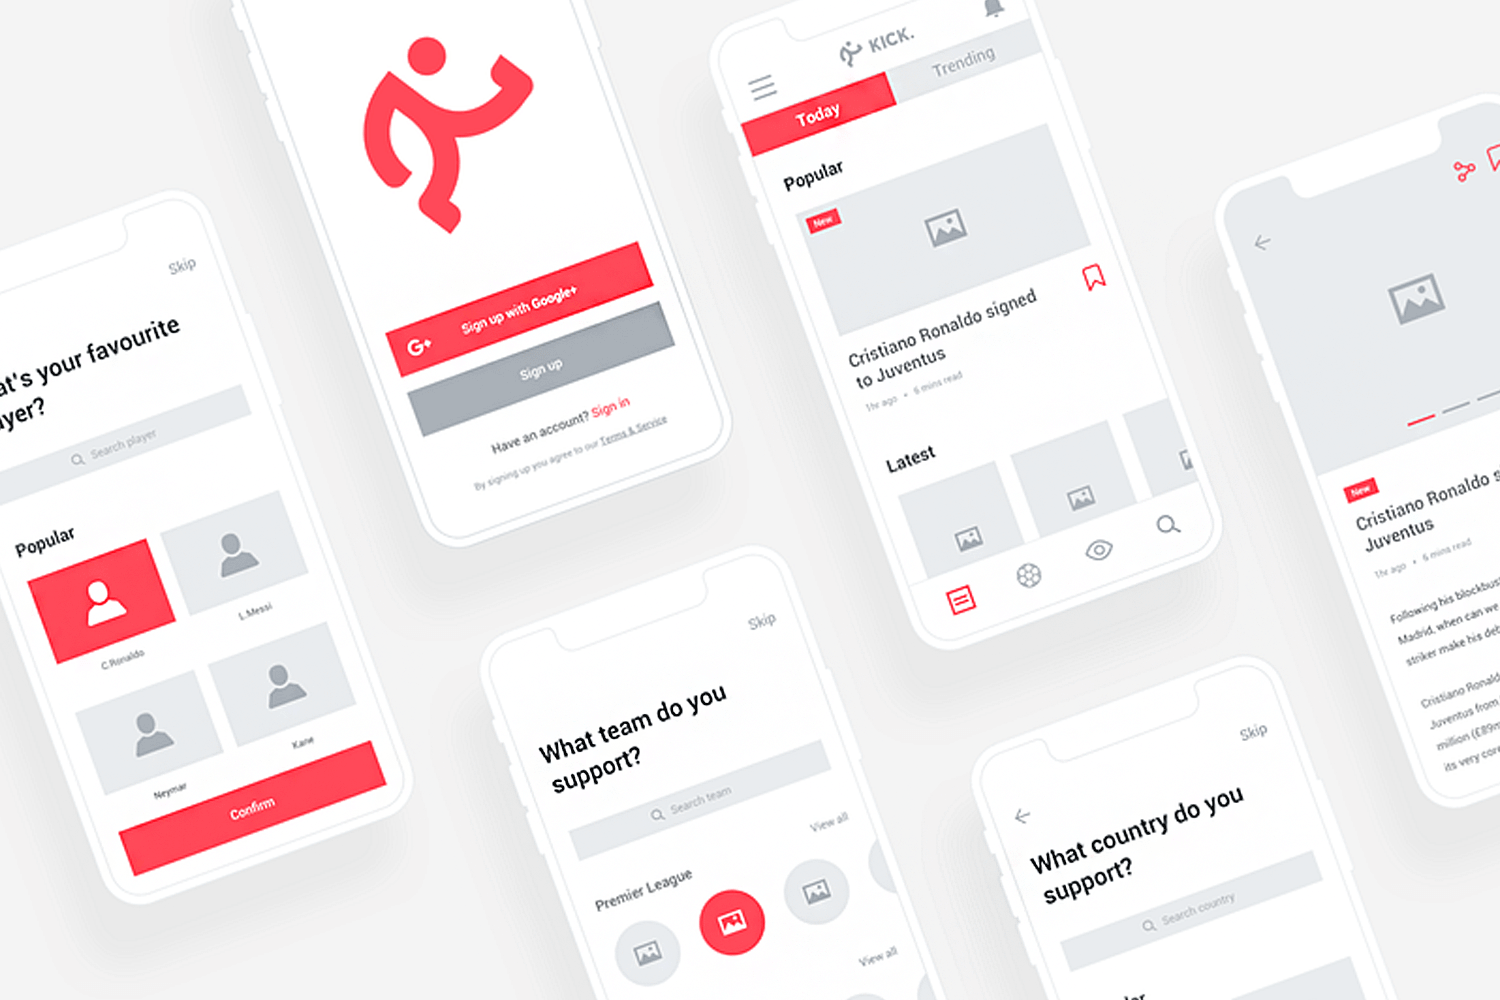 High-fidelity wireframe for a sports app featuring user registration, favorite player selection, and news feed navigation.